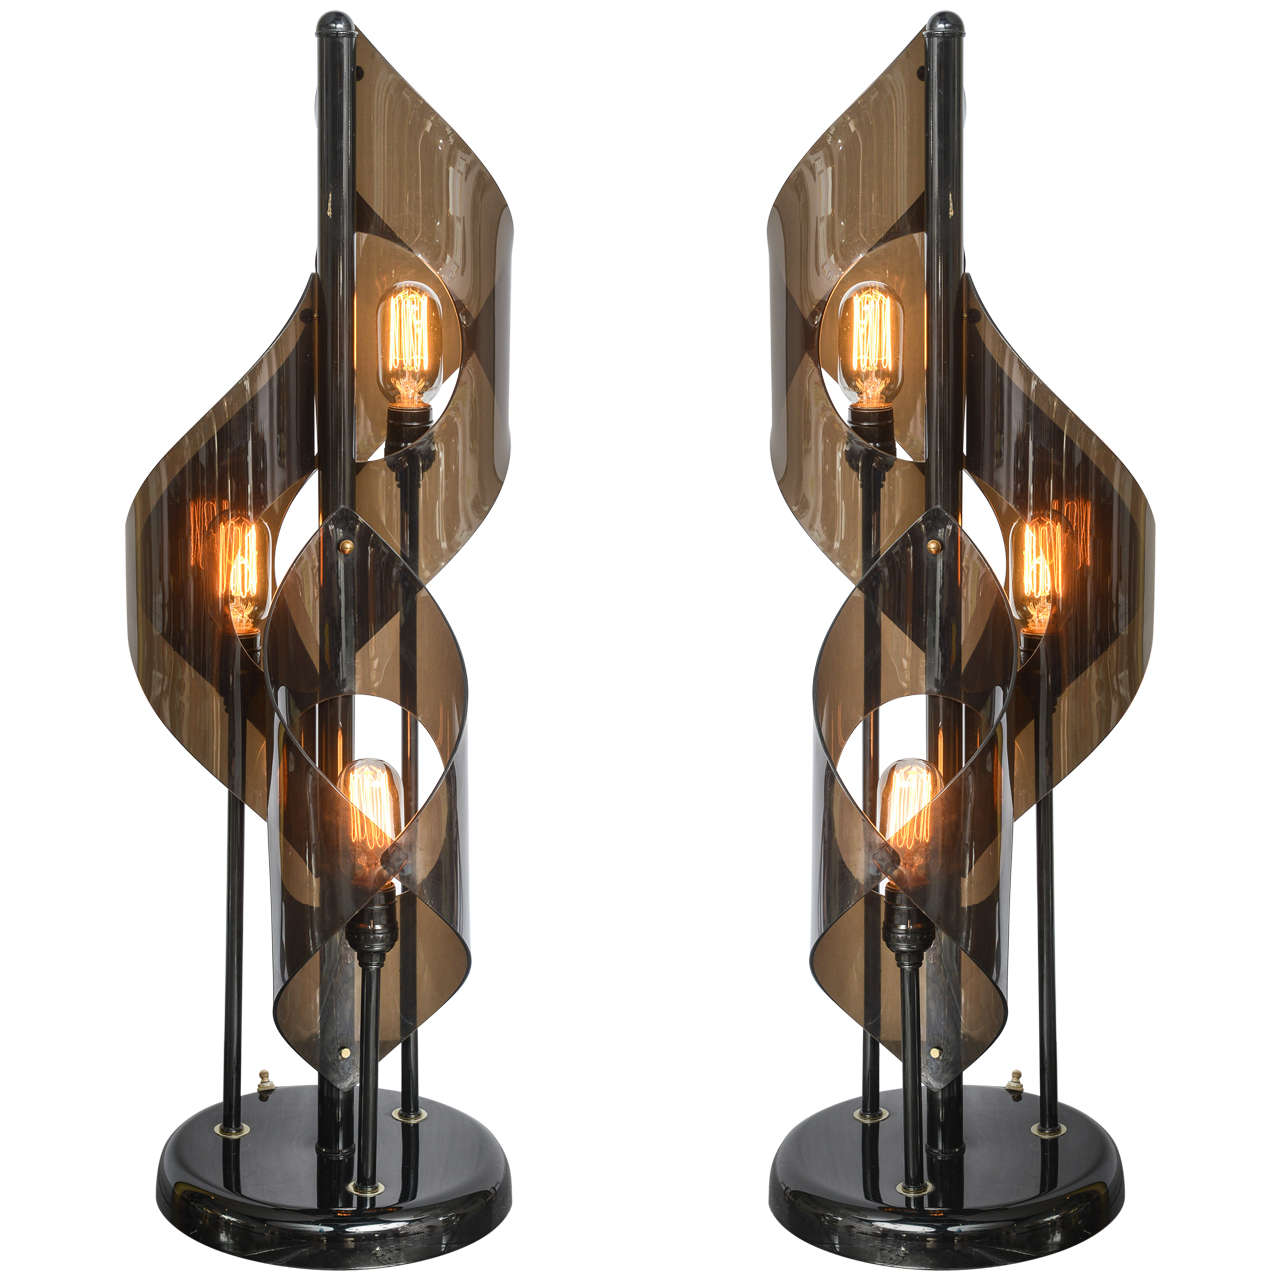 Pair of Tall Acrylic, Black Lucite Table Lamps